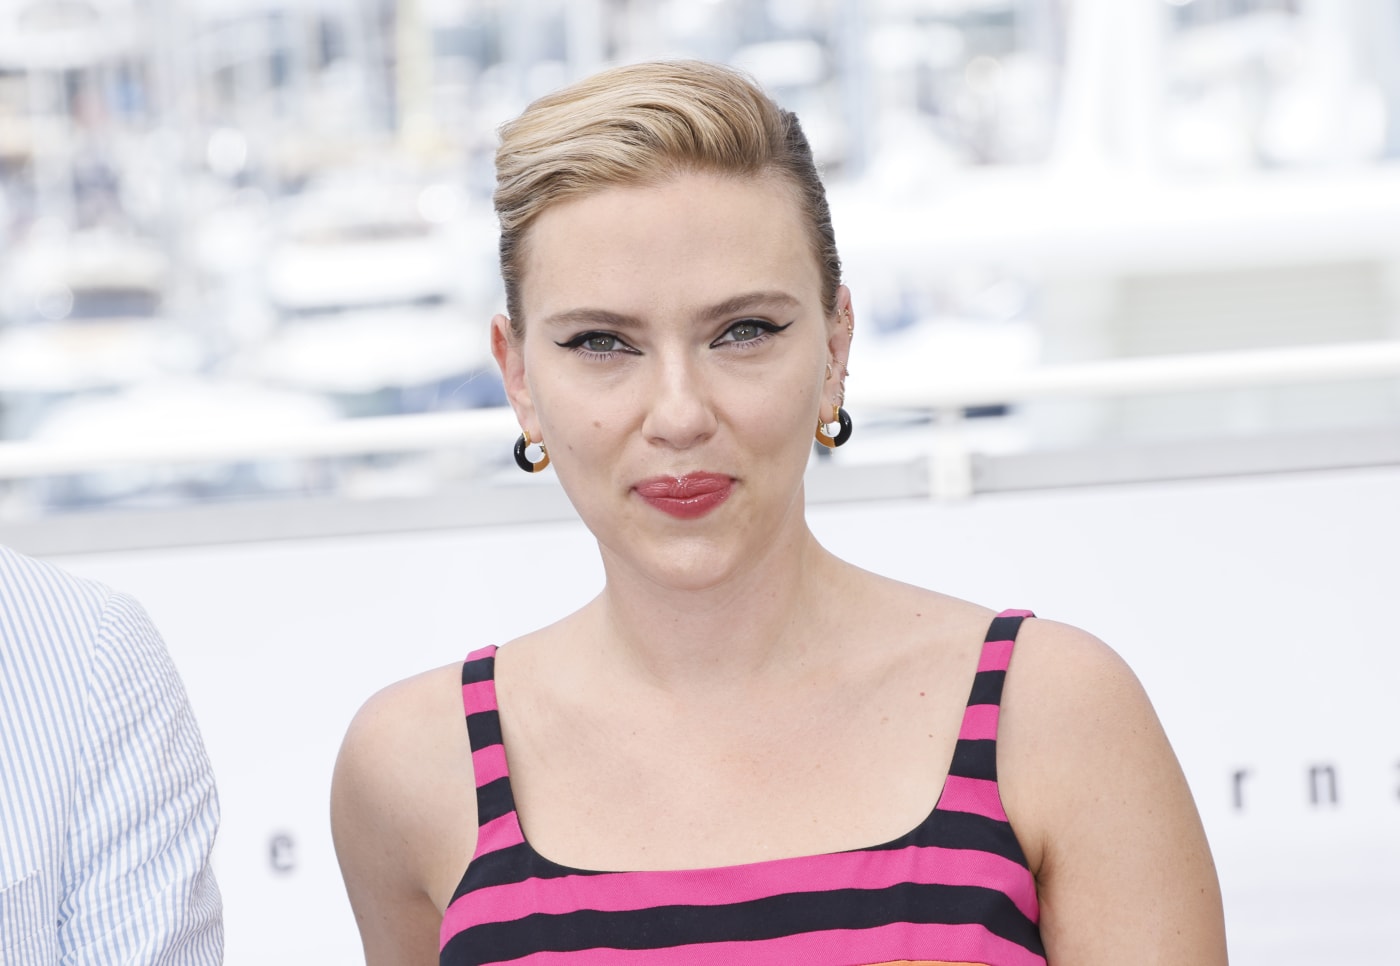 Scarlett Johansson says OpenAI used her likeness without permission for its 'Sky' voice assistant